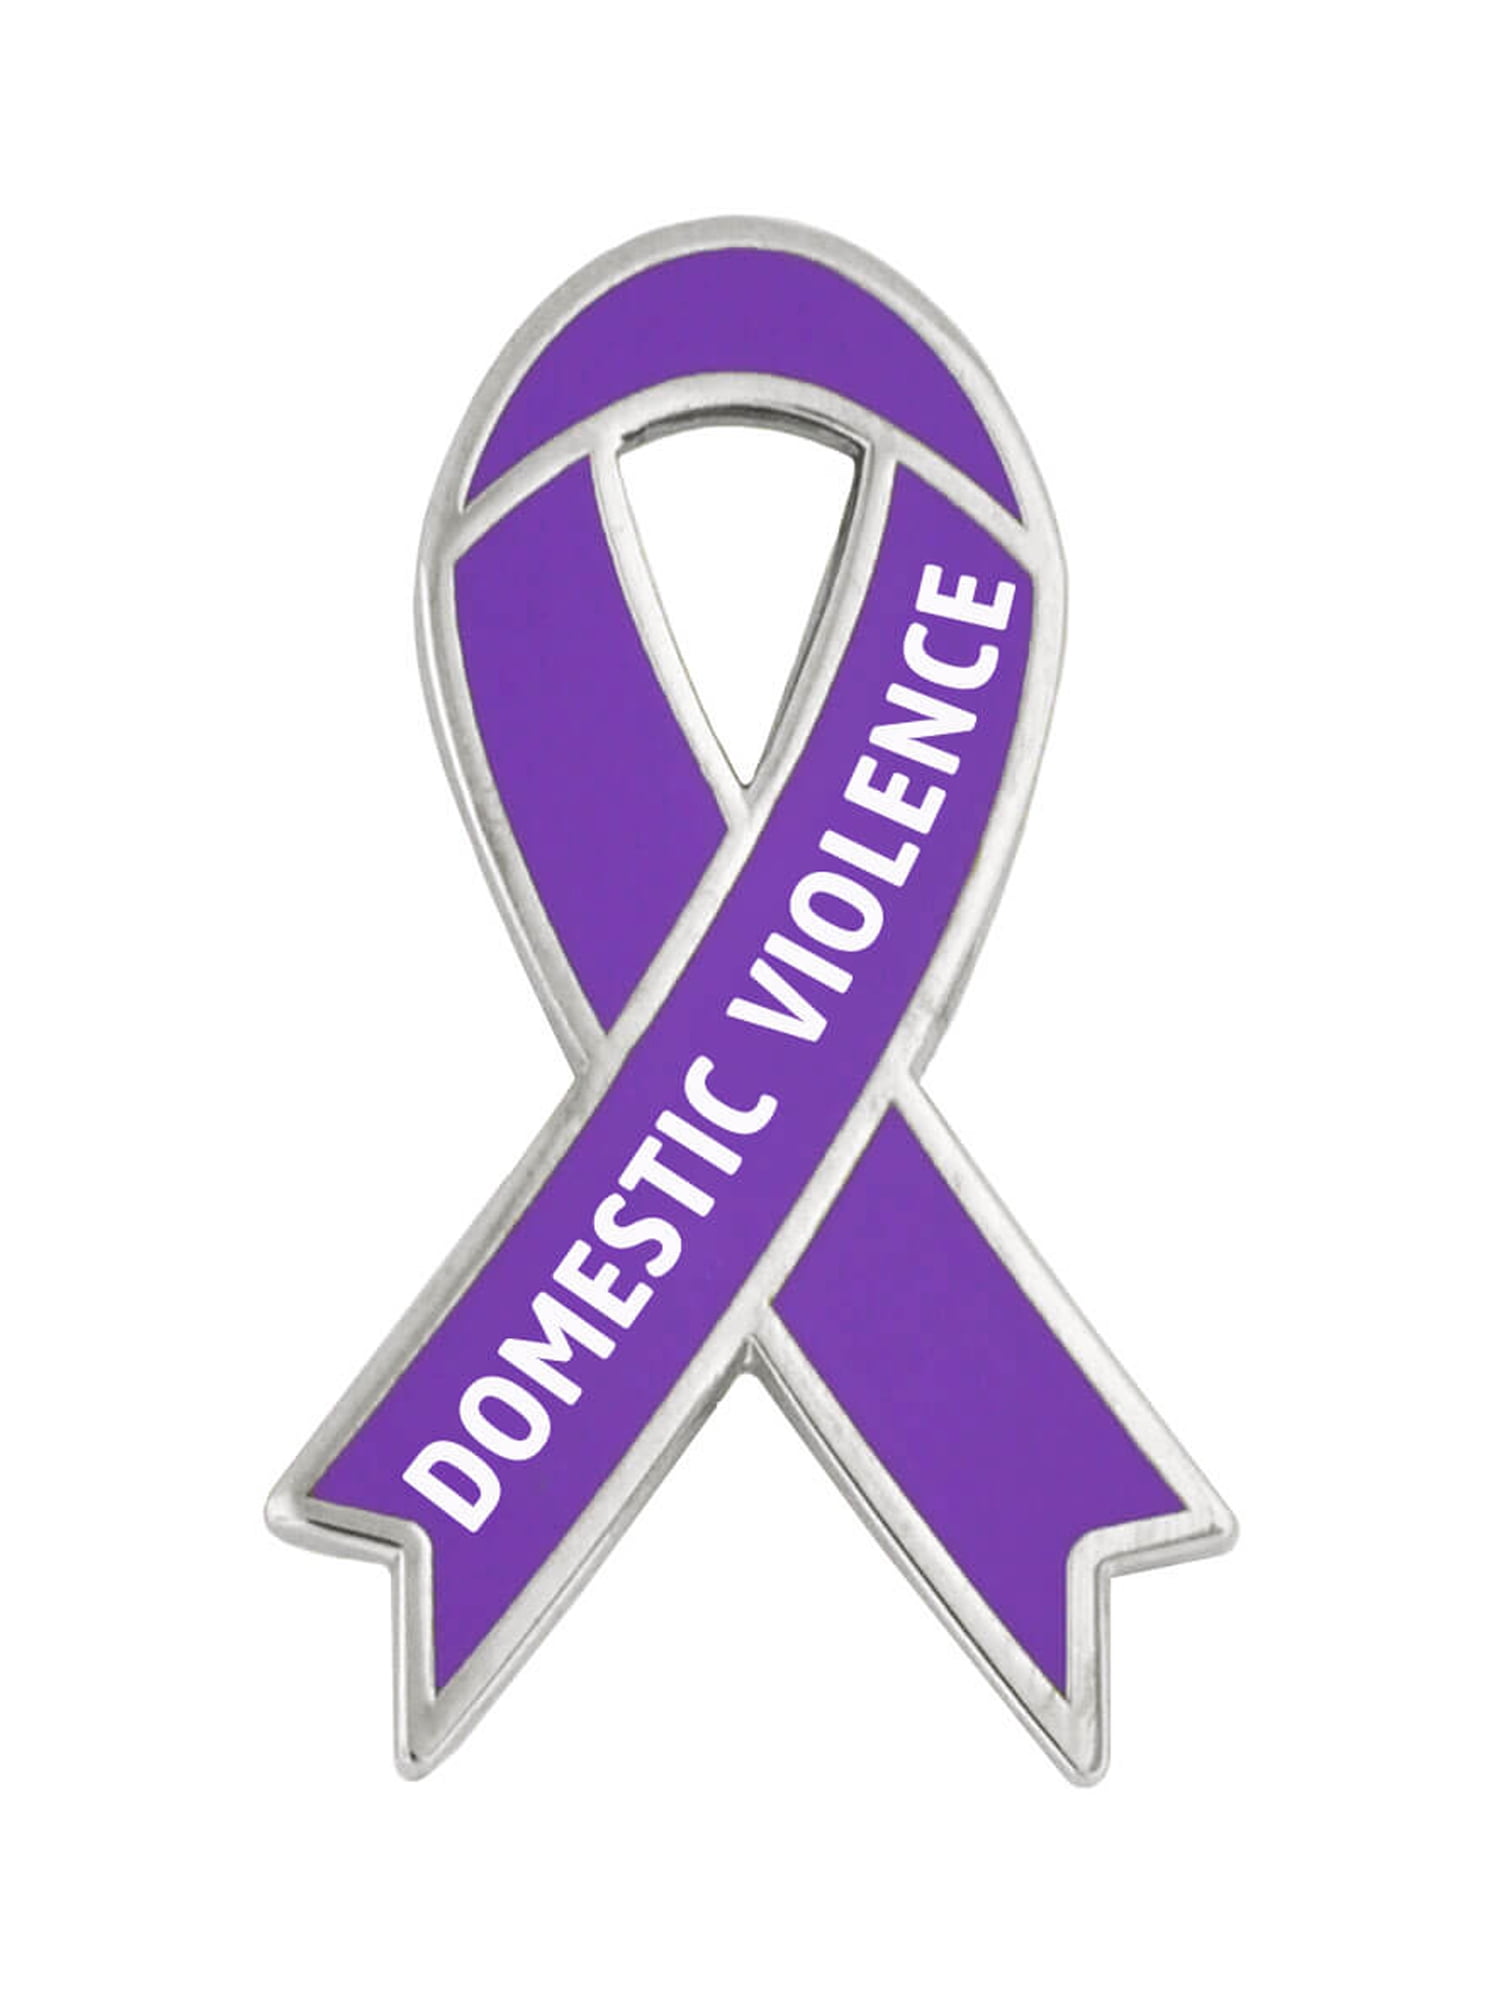 Phone Case Blue Ribbon Support Gift Idea Domestic Violence Awareness Domestic Violence Phone Cover Domestic Violence Ribbon